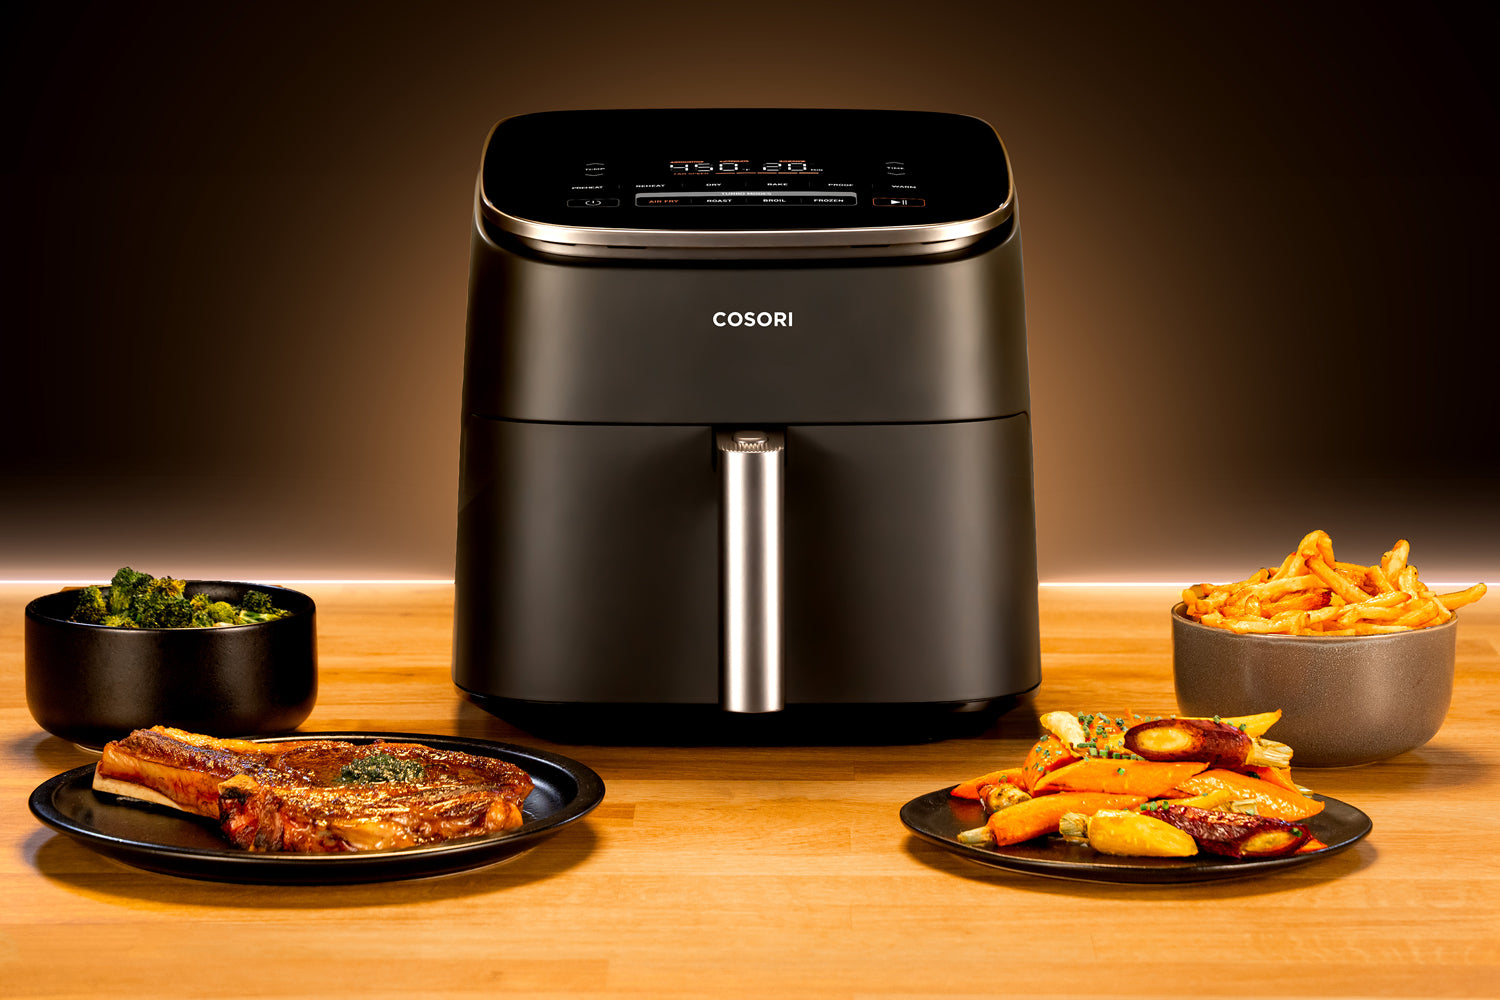 Introducing the all-new COSORI Lite 2.1-Quart Mini Air Fryer. With